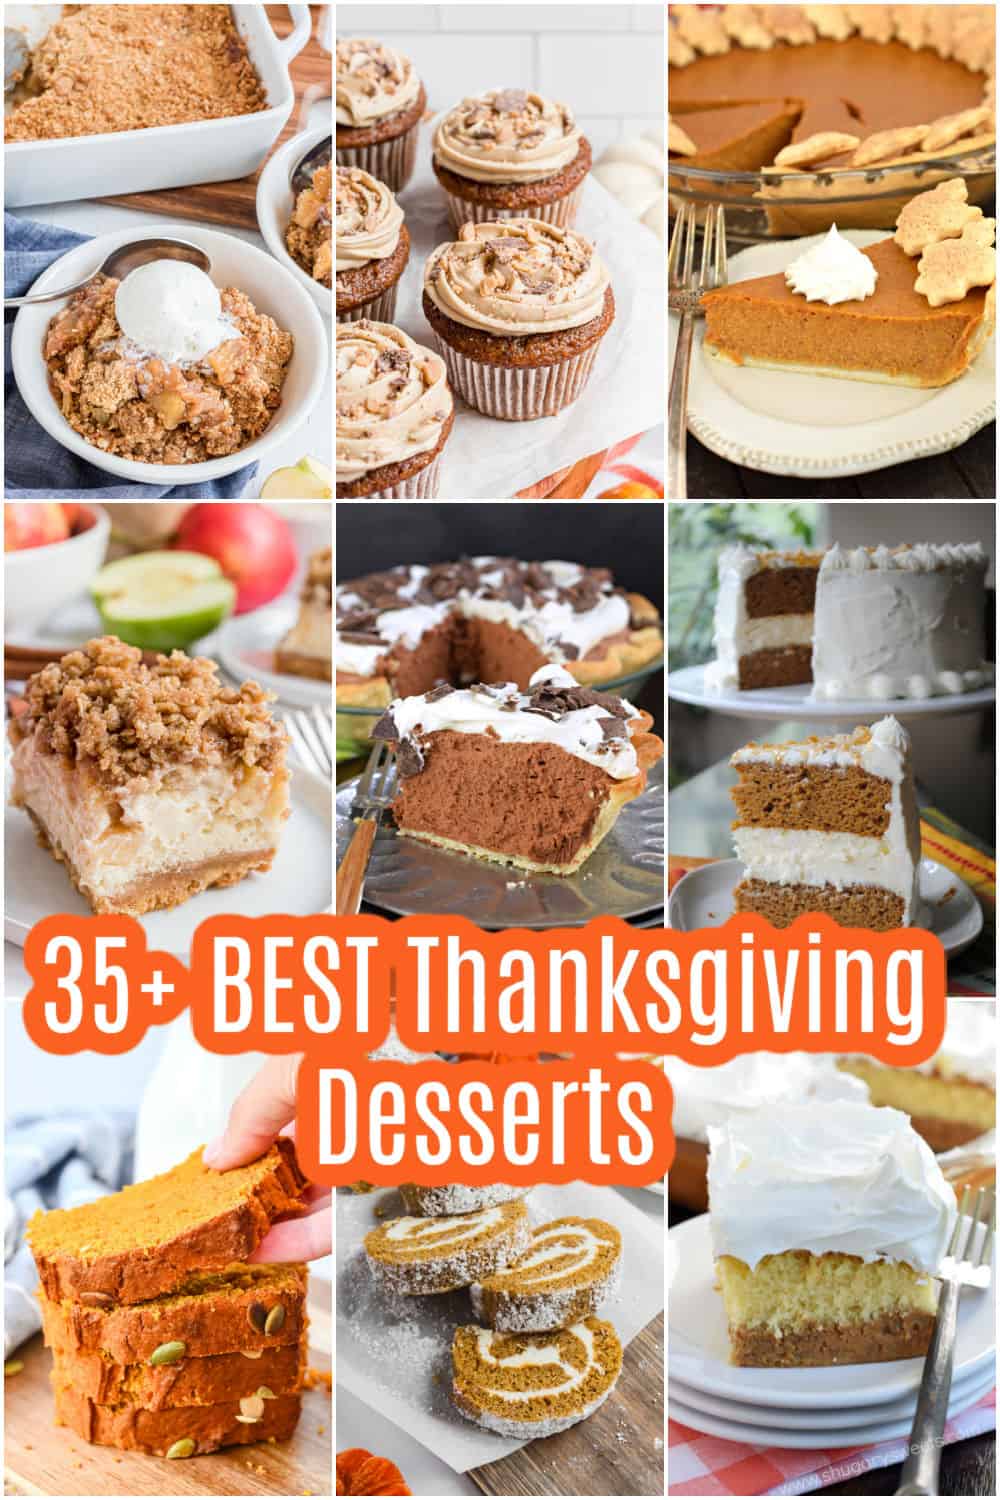 Over 35 of the best Thanksgiving dessert recipes!